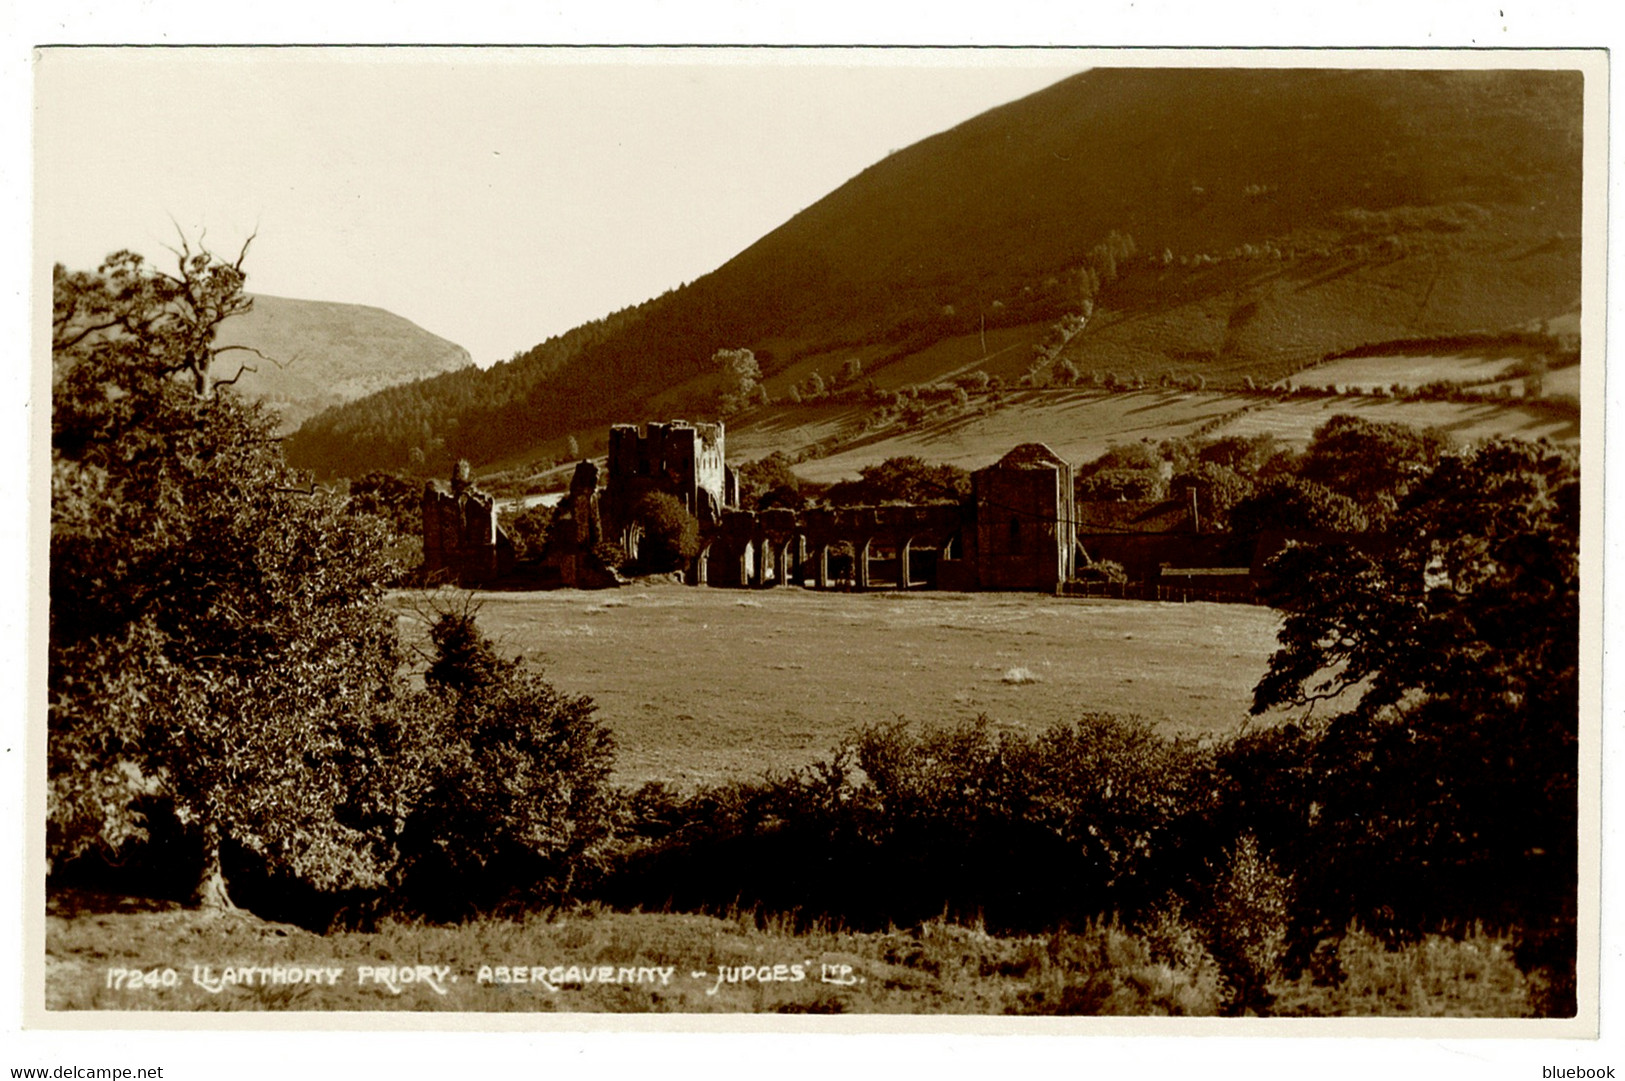 Ref 1452  - Judges Real Photo Postcard - Llanthony Priory - Abergavenny Monmouthshire Wales - Monmouthshire